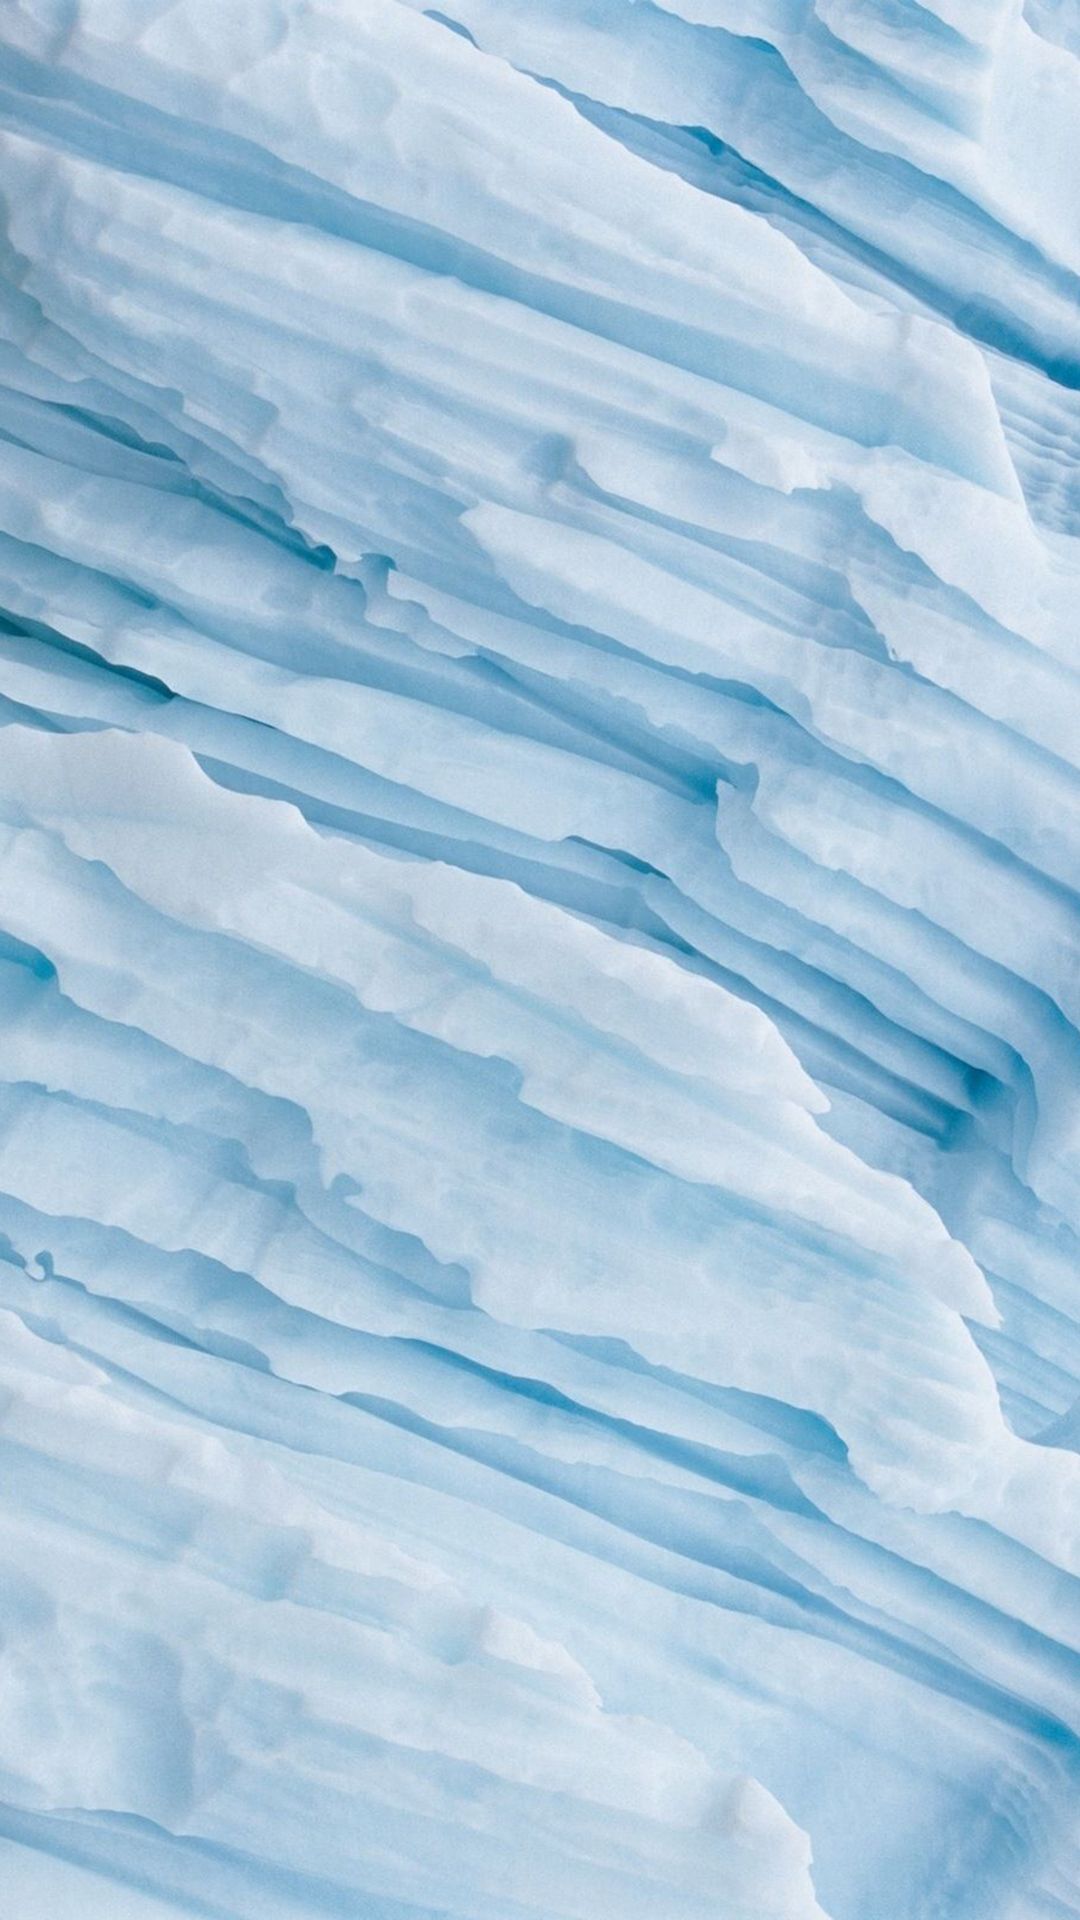 An abstract photo of ice formations on a glacier. - Light blue, pastel blue, ice